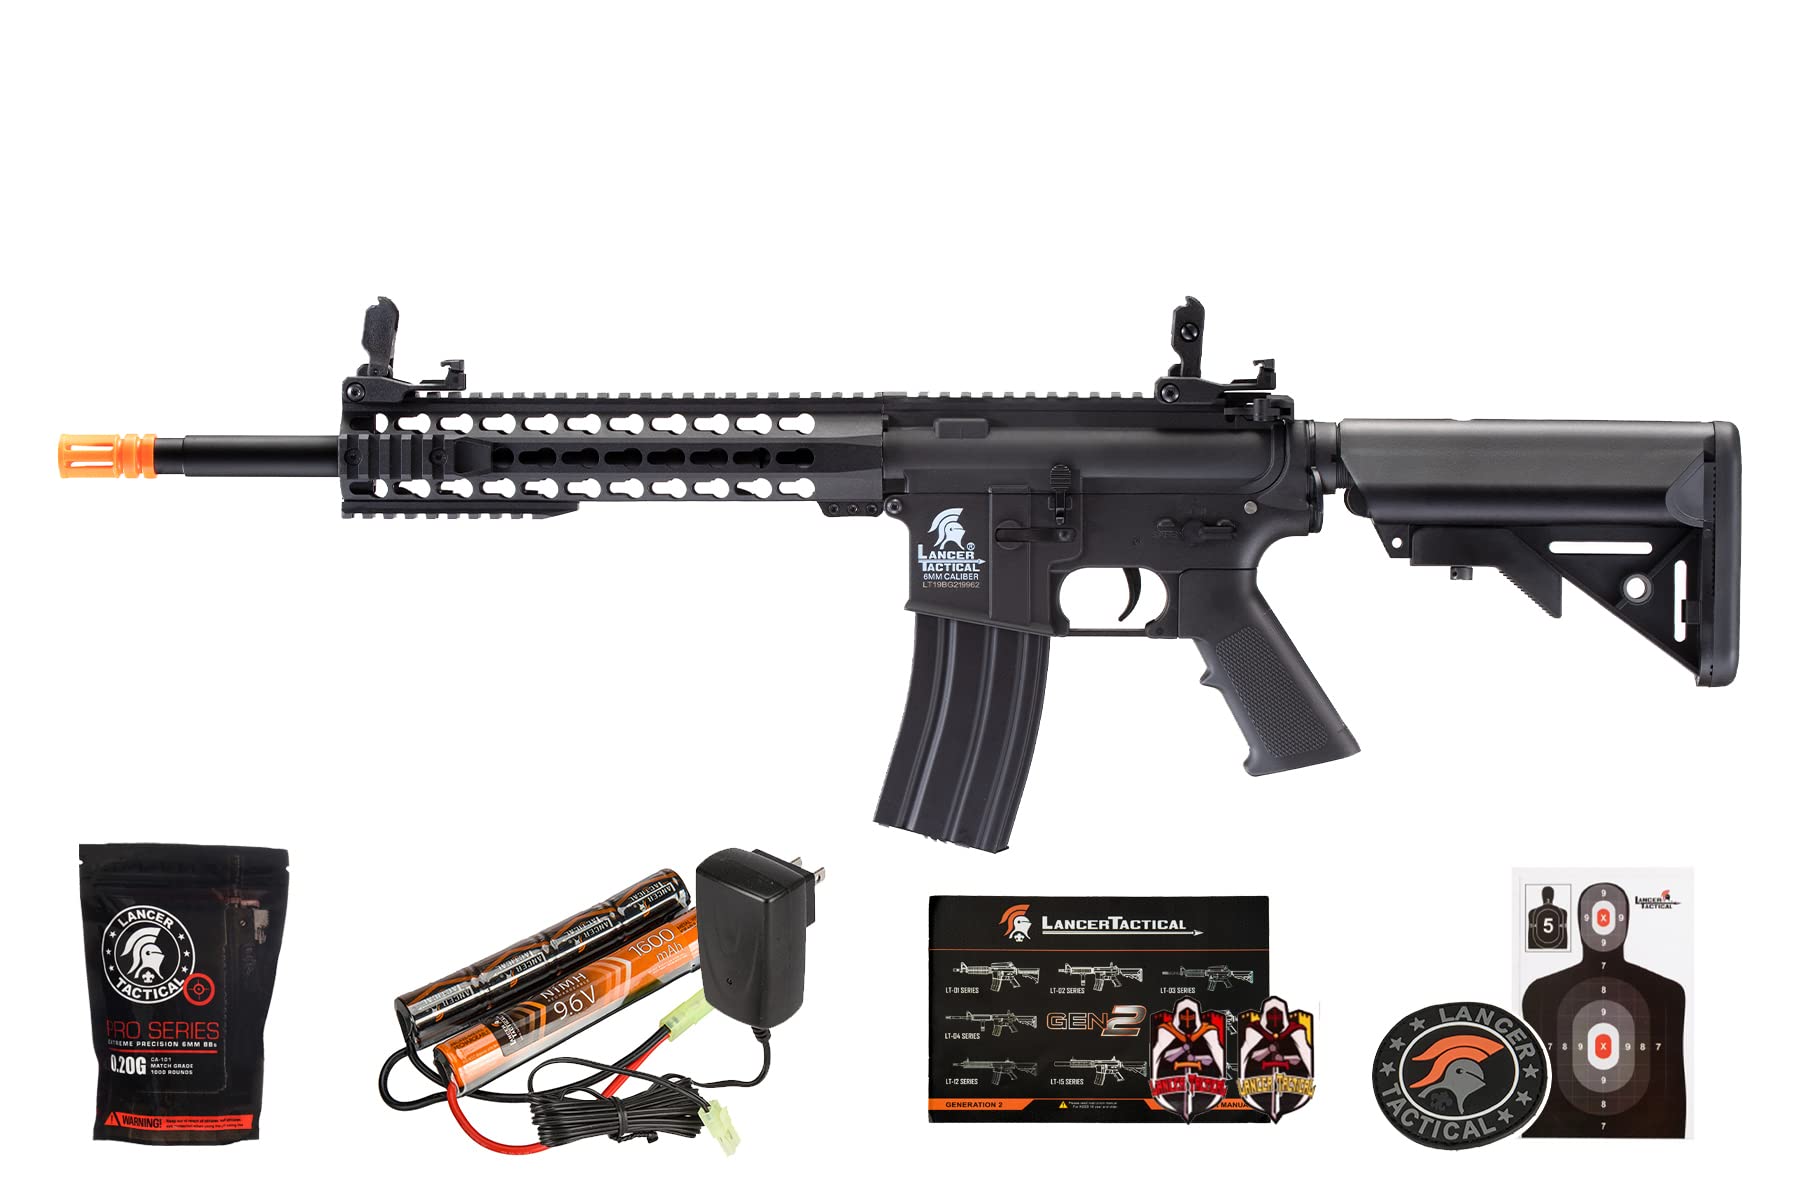 Lancer Tactical Generation 2 Airsoft M4 AEG Gen 2 with Carbine Airsoft AEG 10'' Rail, Battery & Charger Included -Color Black/Tan